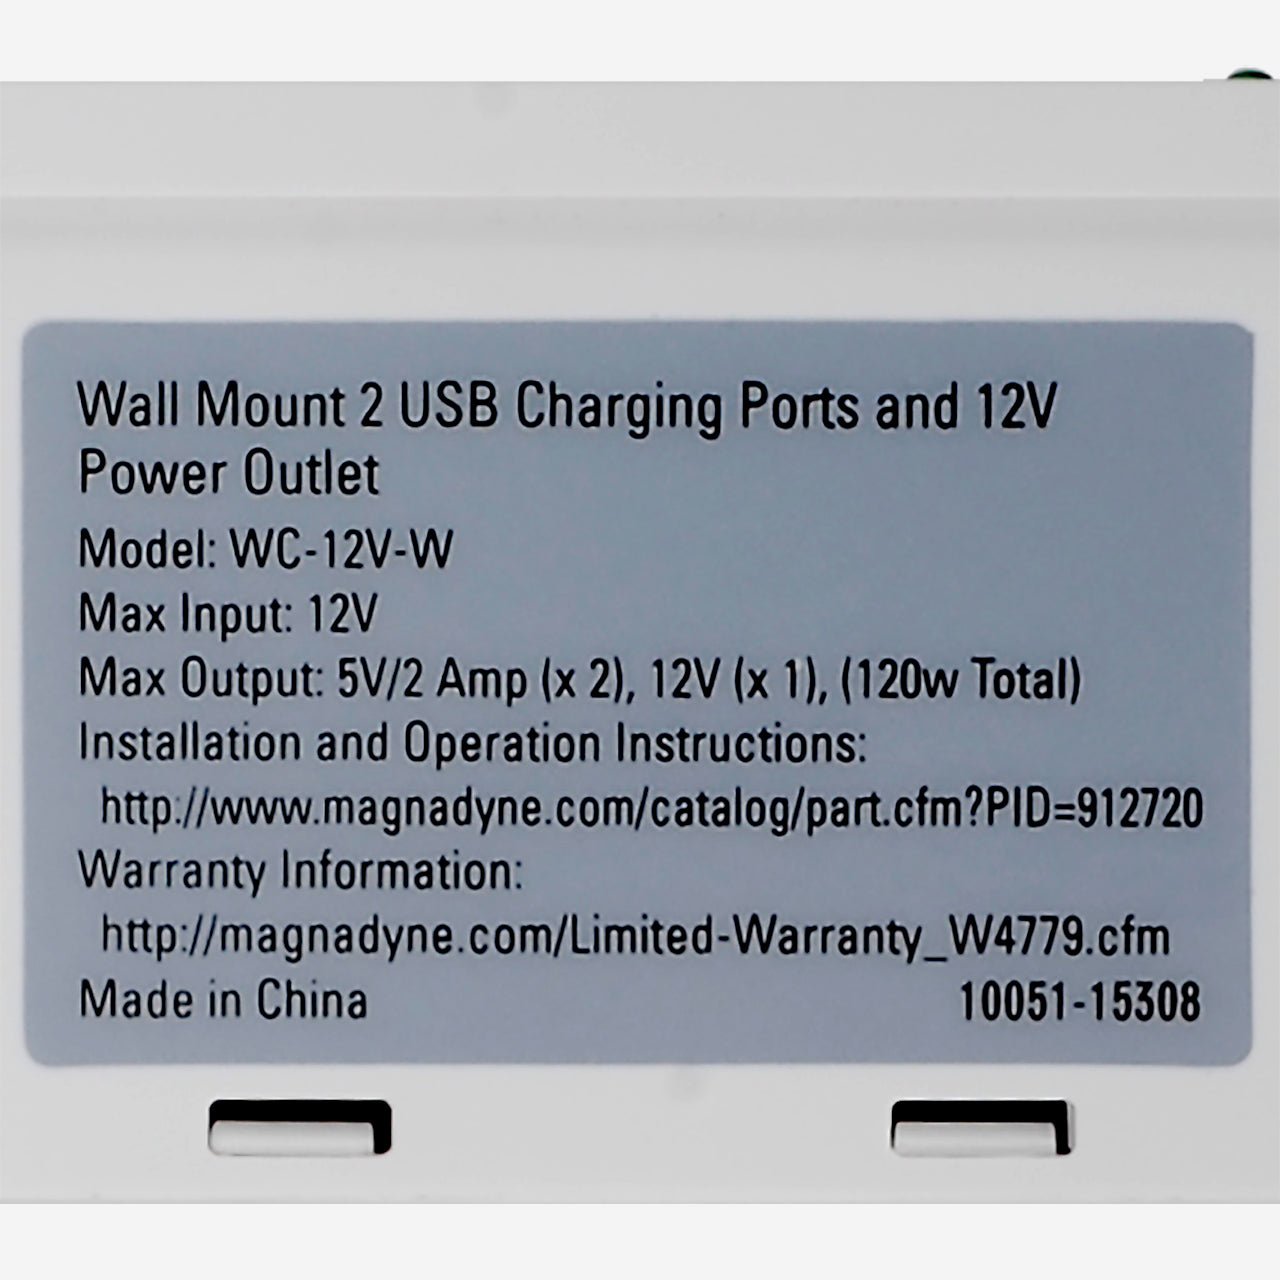 Magnadyne WCP-12V | Wall Mount USB Charger | 2 Ports and 12V Power Outlet w/ Wall Plate